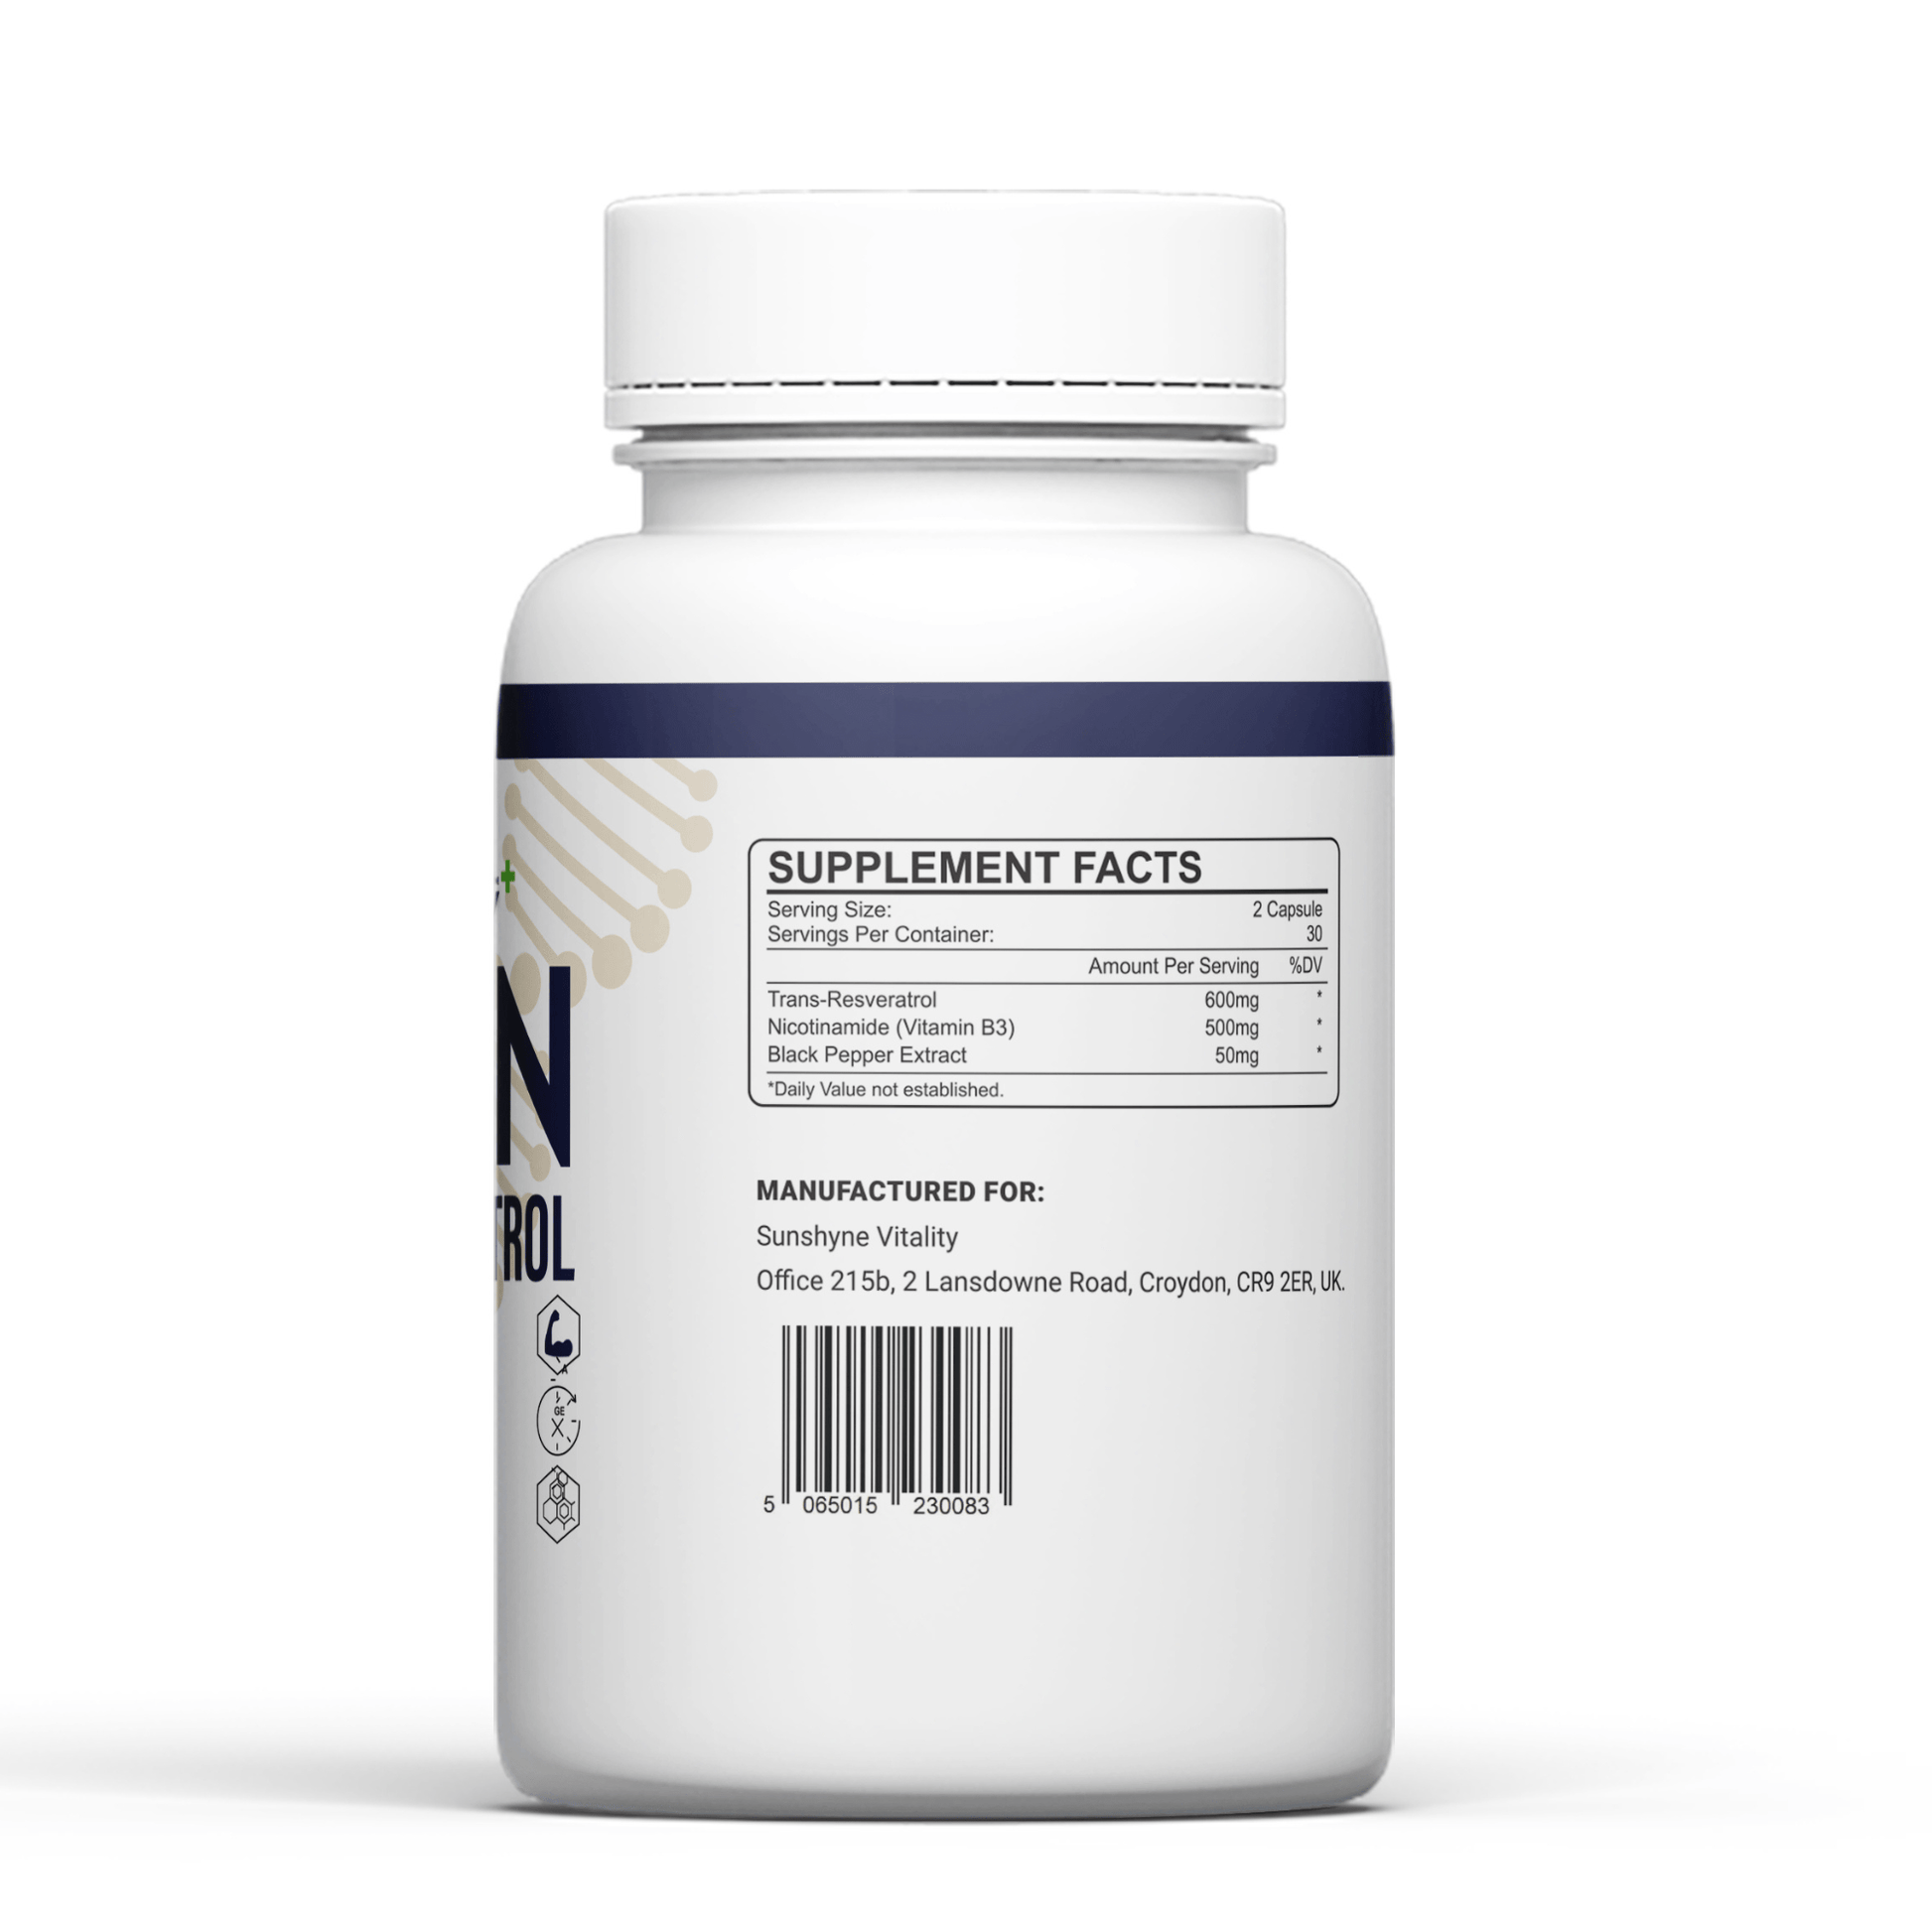 High Purity NMN & Resveratrol Supplement - Elevate NAD+, Cellular Health & Longevity | 1100mg | 1 Months Supply - Vitality Supplements